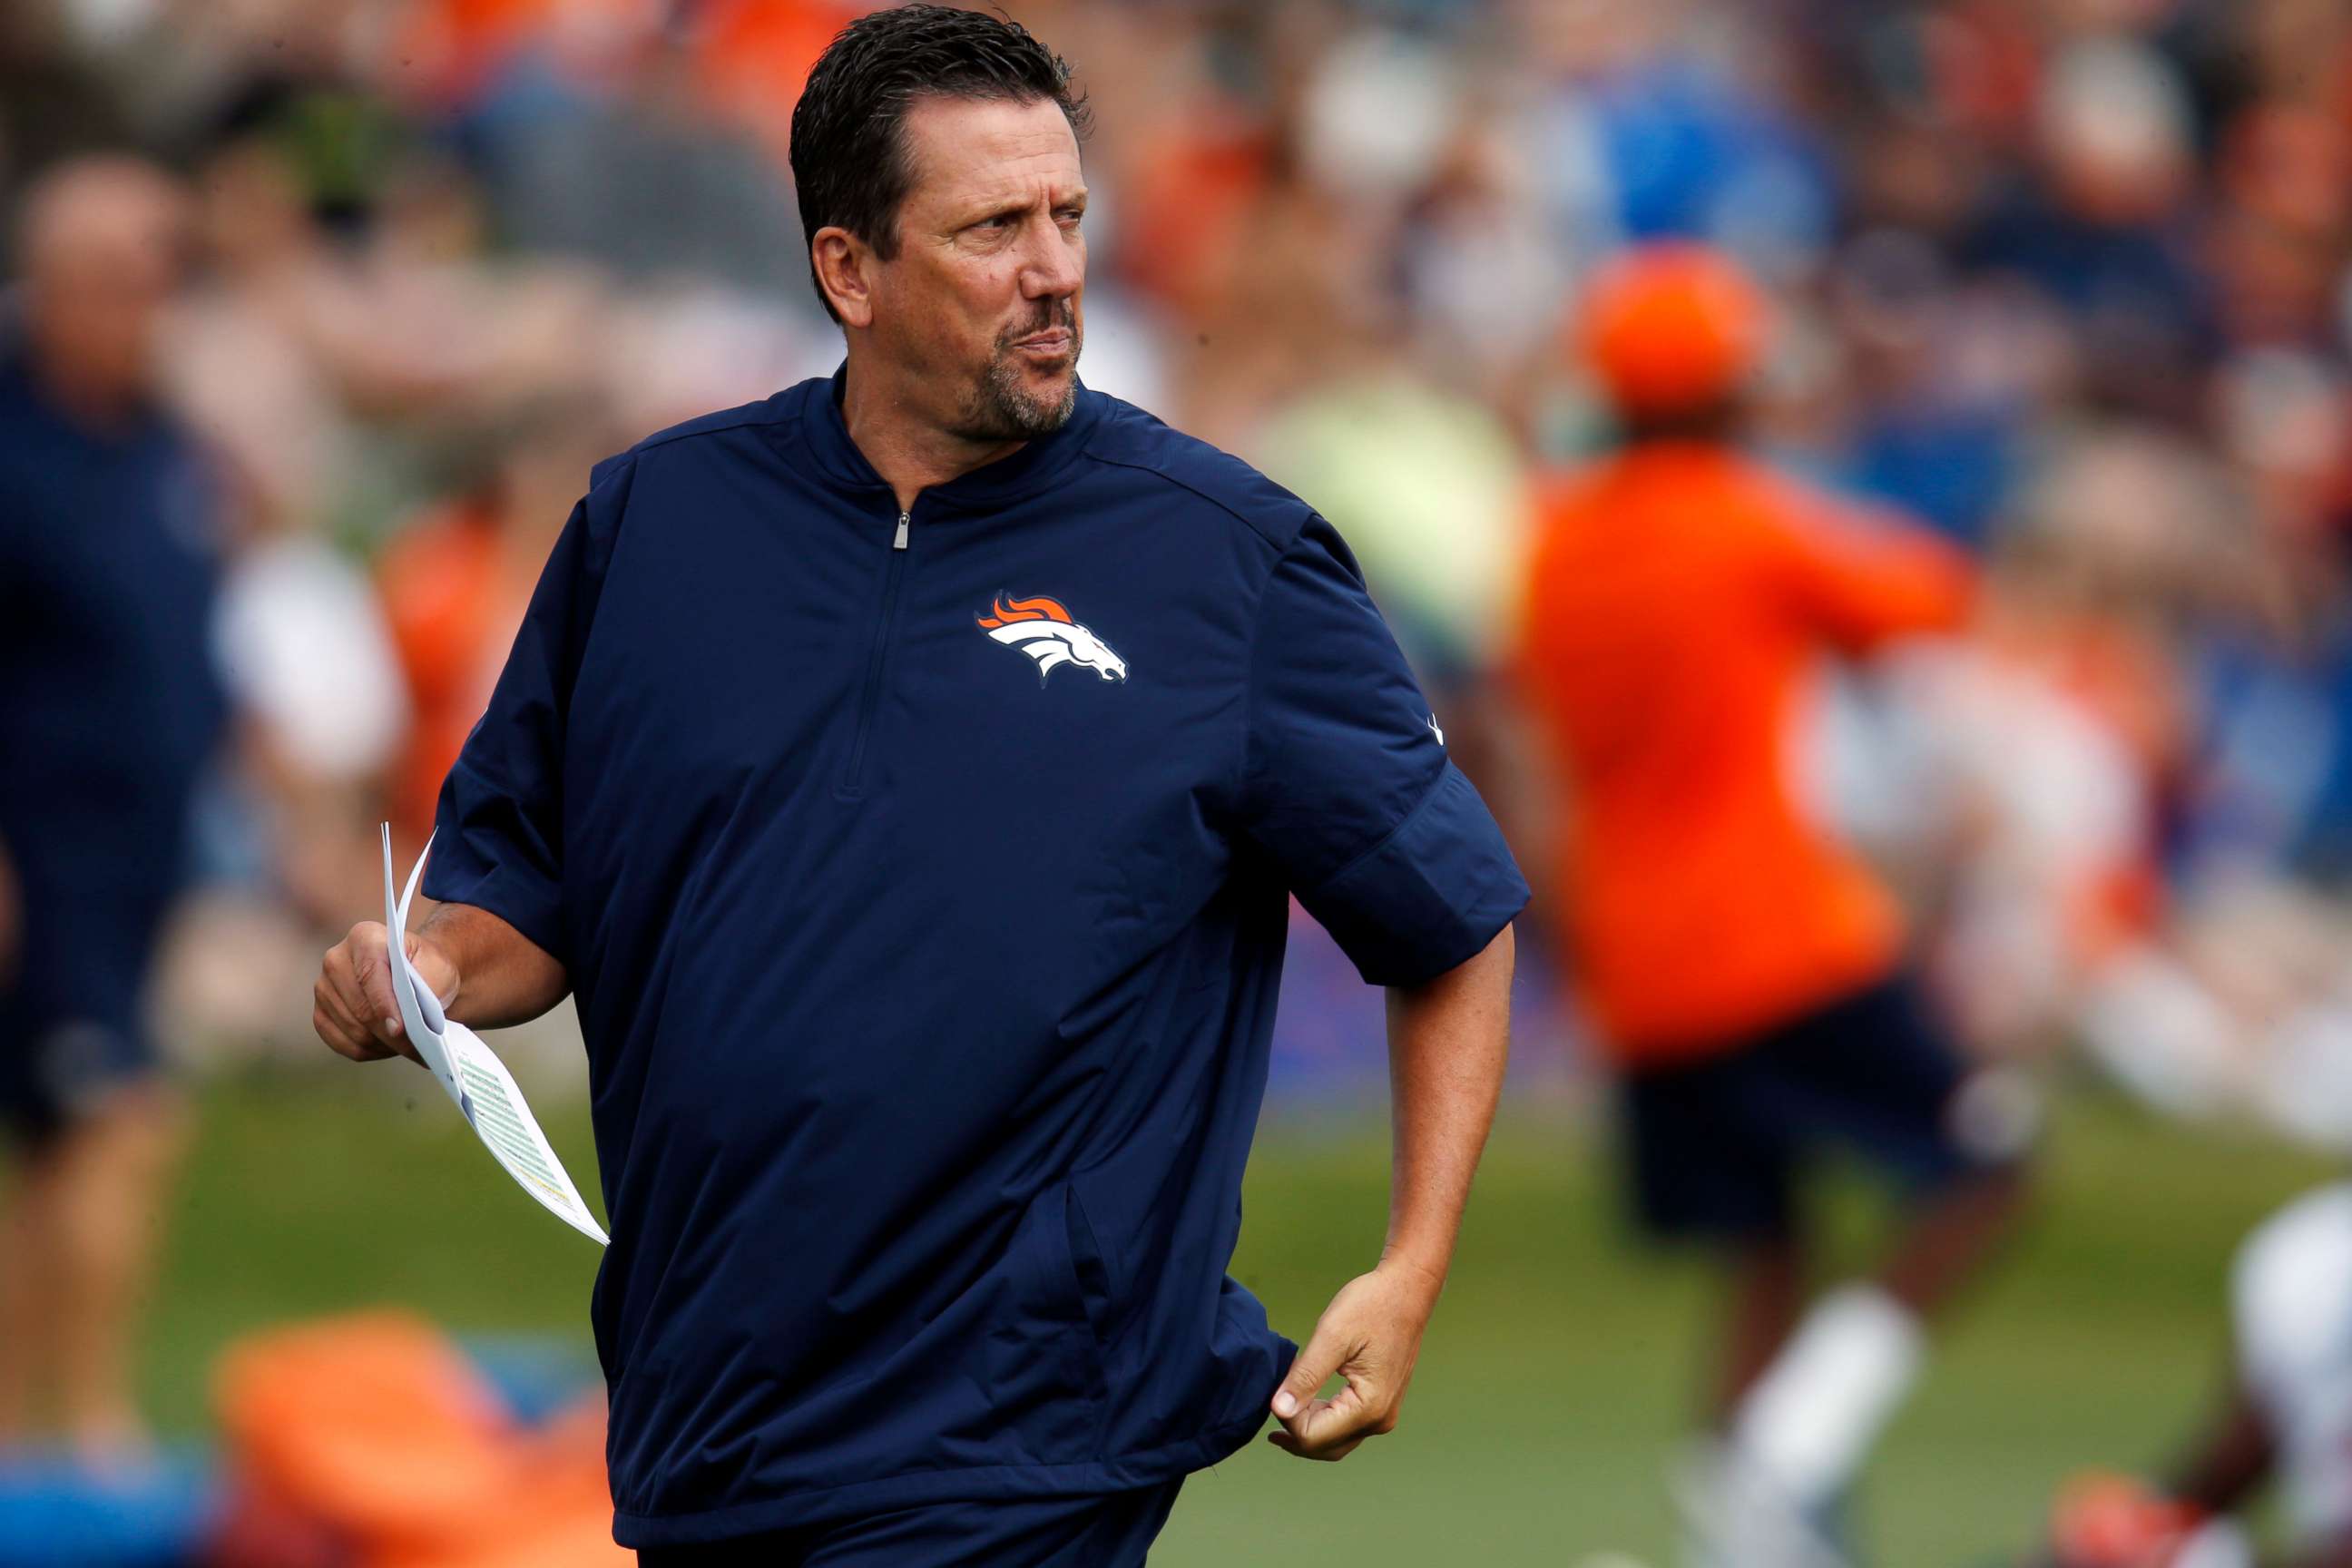 PHOTO: In this Aug. 4, 2016, file photo, Denver Broncos quarterbacks coach Greg Knapp watches during NFL football training camp in Englewood, Colo. 